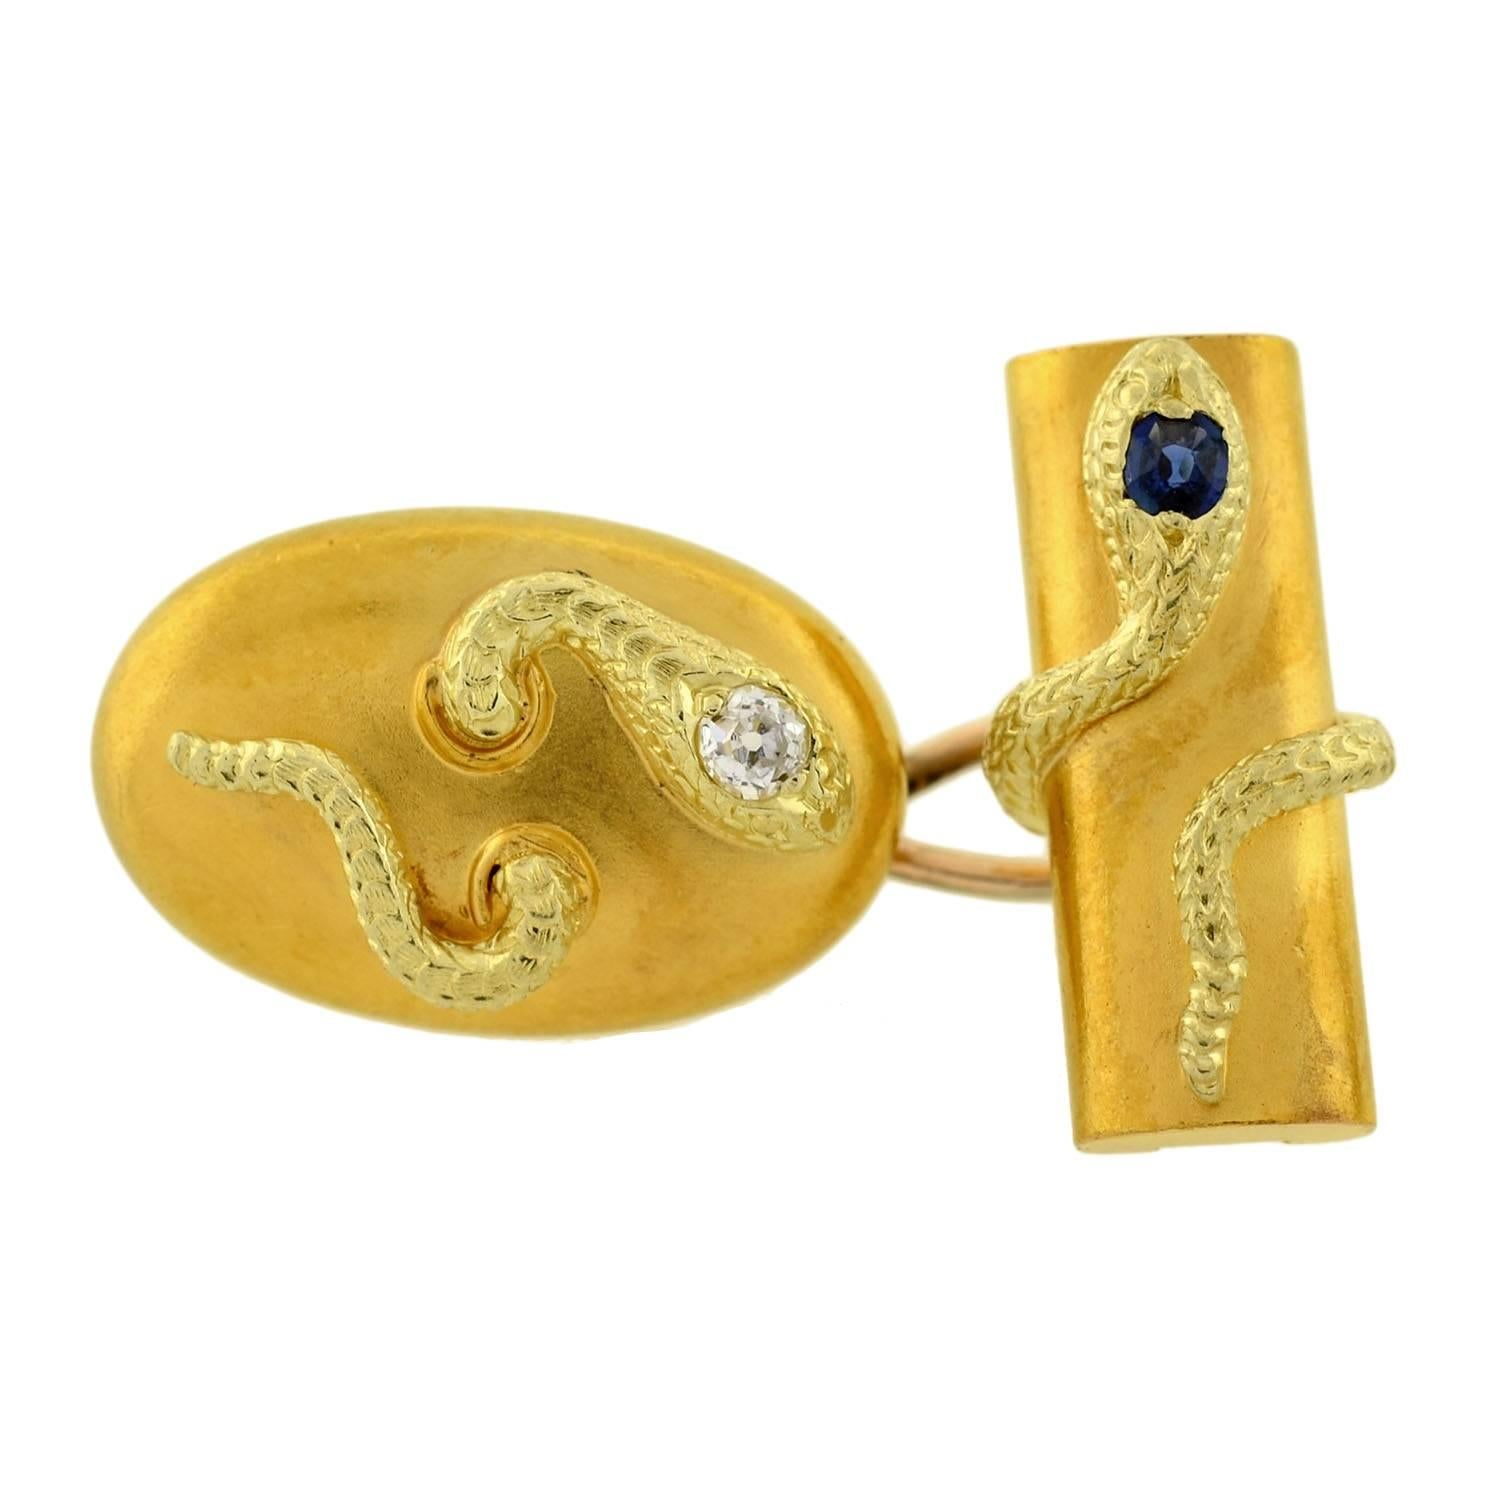 An unusual pair of 18kt gold snake cufflinks from the Victorian (ca1880) era! Each of these double-sided cufflinks has an artistic snake motif in raised 3-dimensional detail. A single serpent appears to weave through the surface of the oval link,